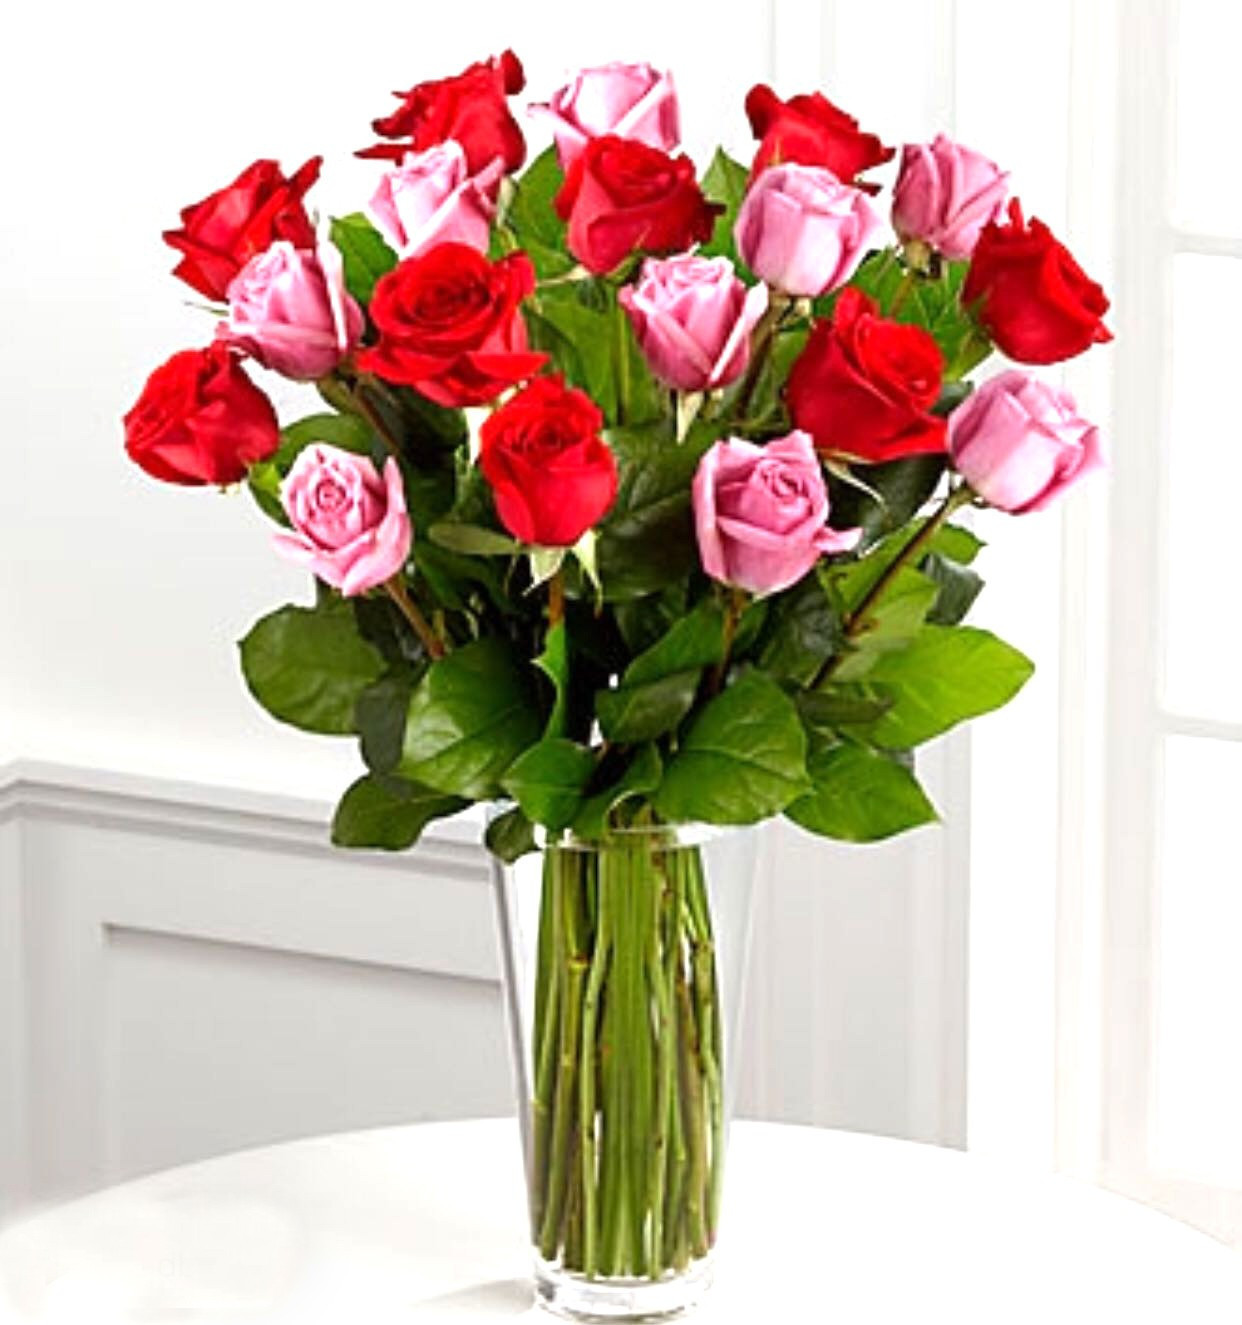 28 Popular Tall Vase and Flowers 2024 free download tall vase and flowers of pink flowers image best of tall vase centerpiece ideas vases flowers with pink flowers image awesome pink roses with wax flowerh vases in a vase floweri 0d white